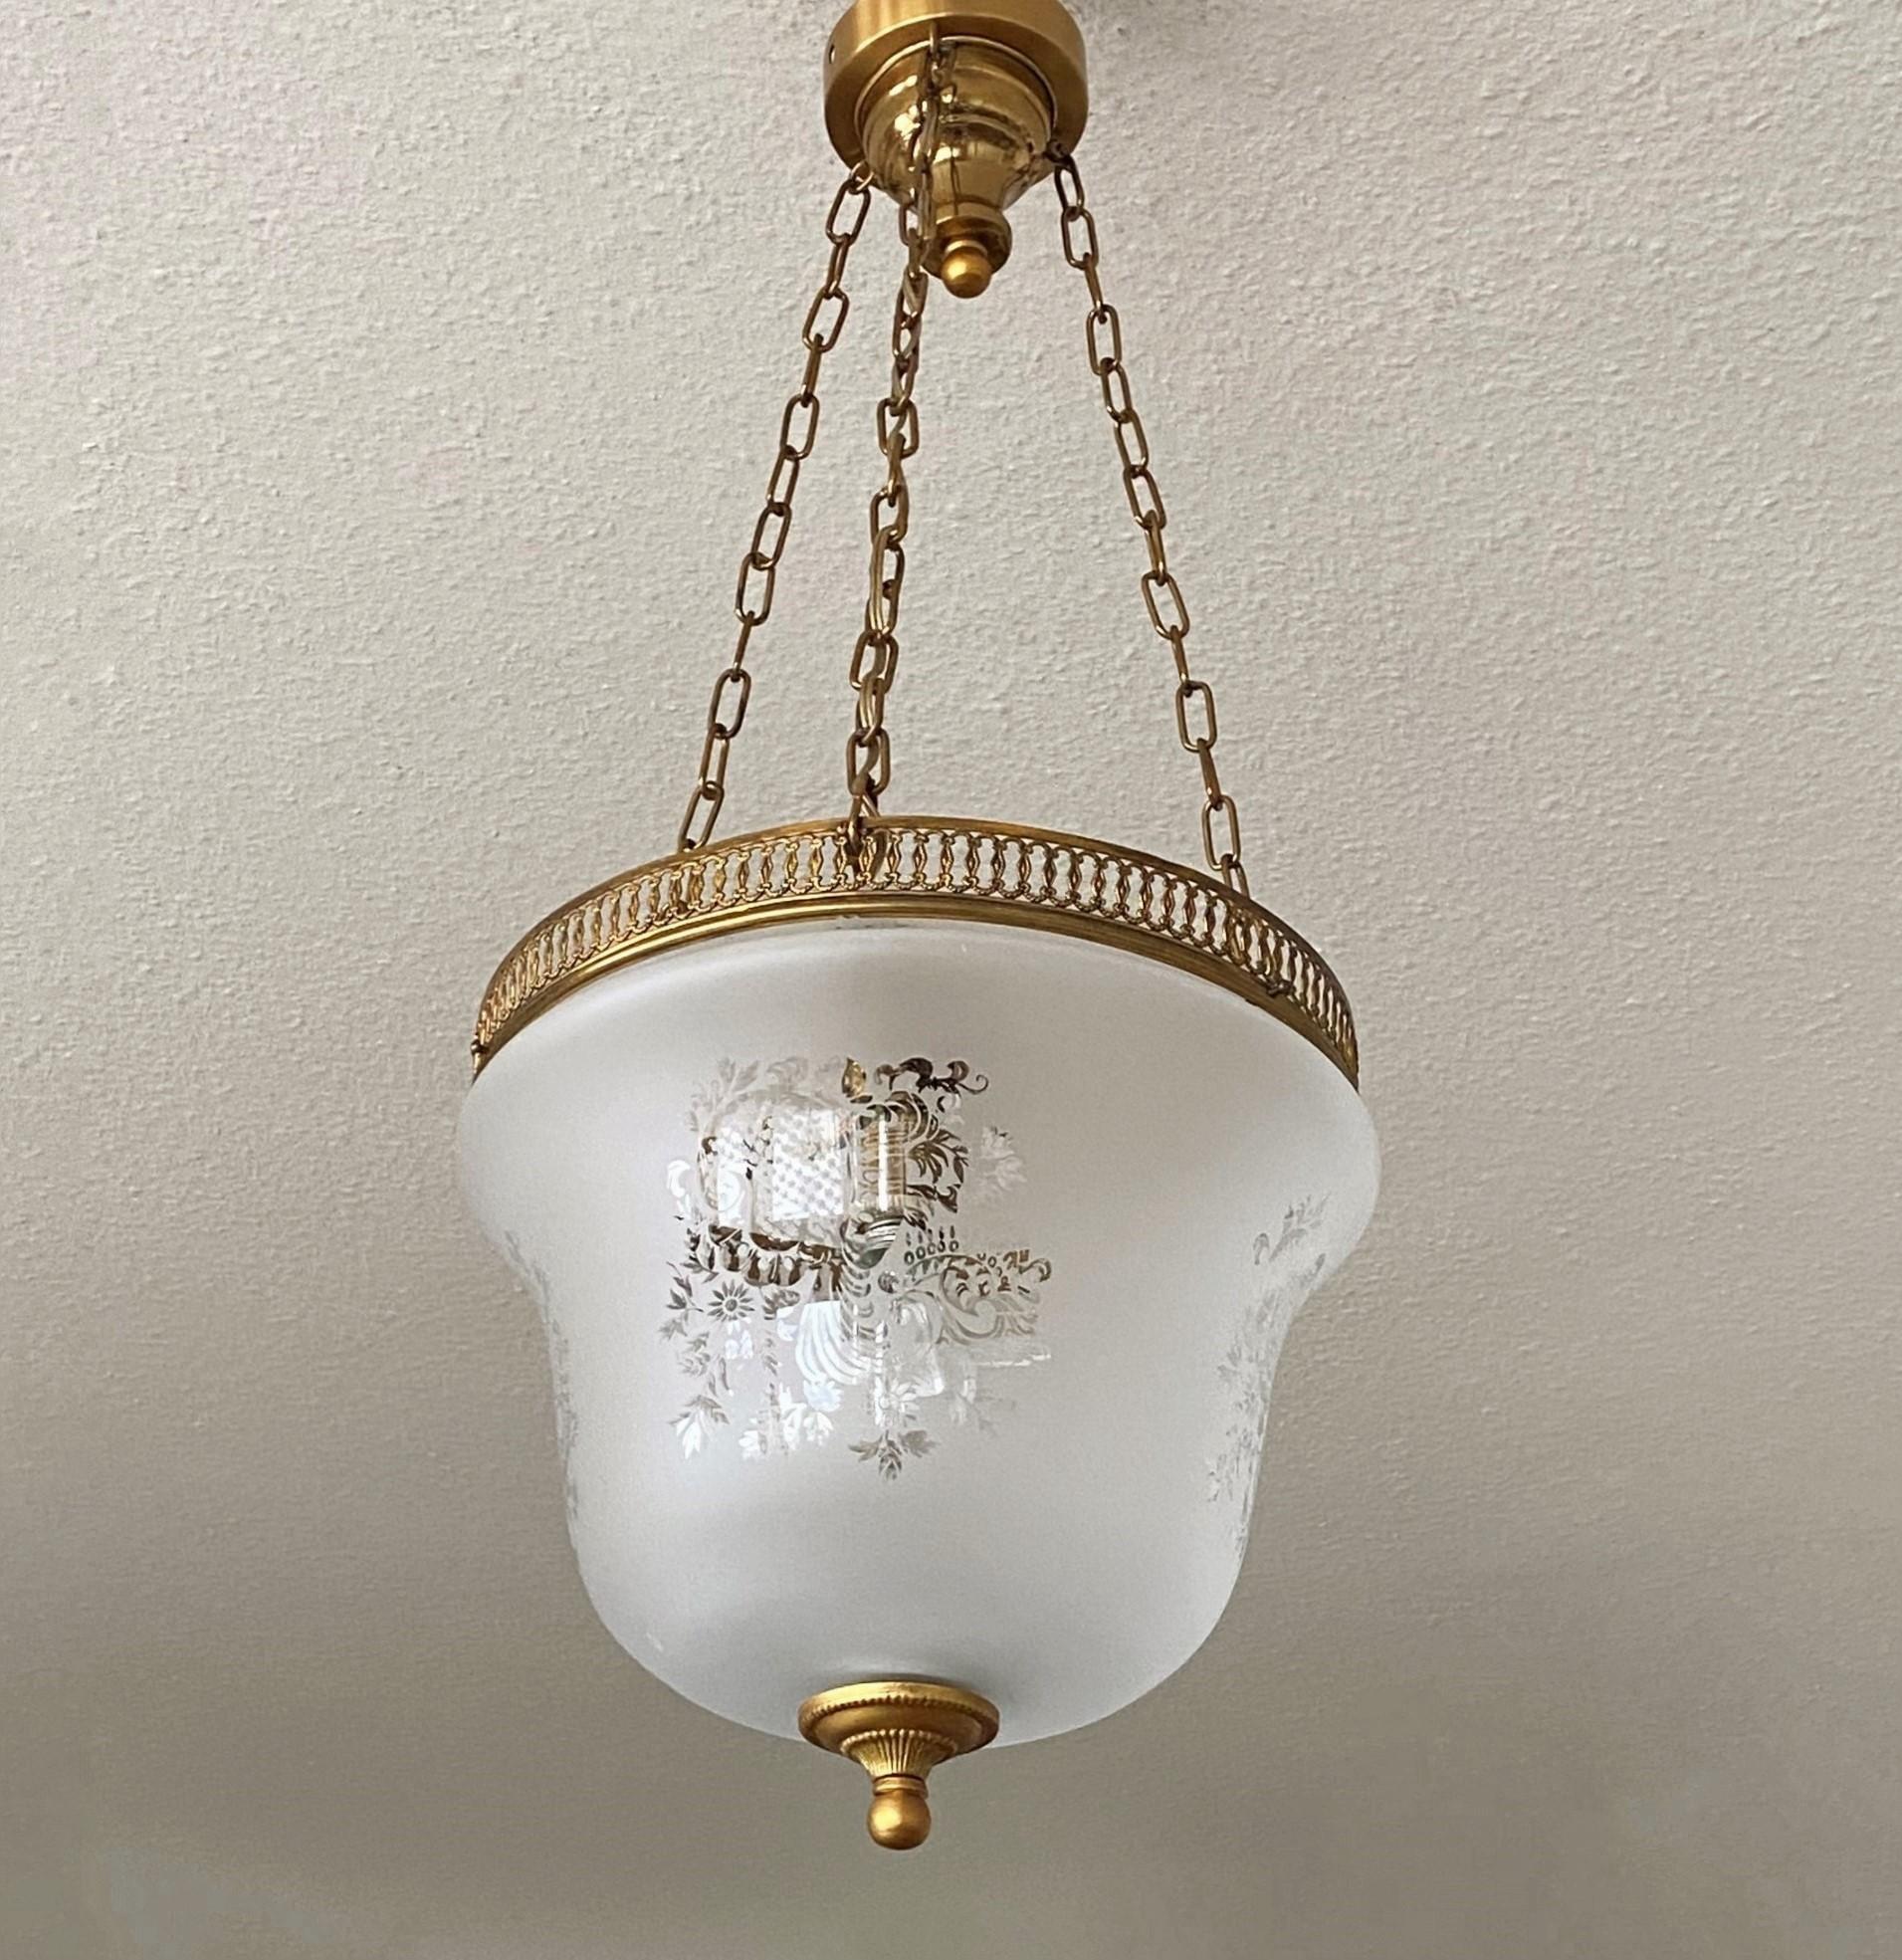 French Art Deco Etched Glass Brass Bell Lantern Cloche Pendant, 1930s For Sale 3